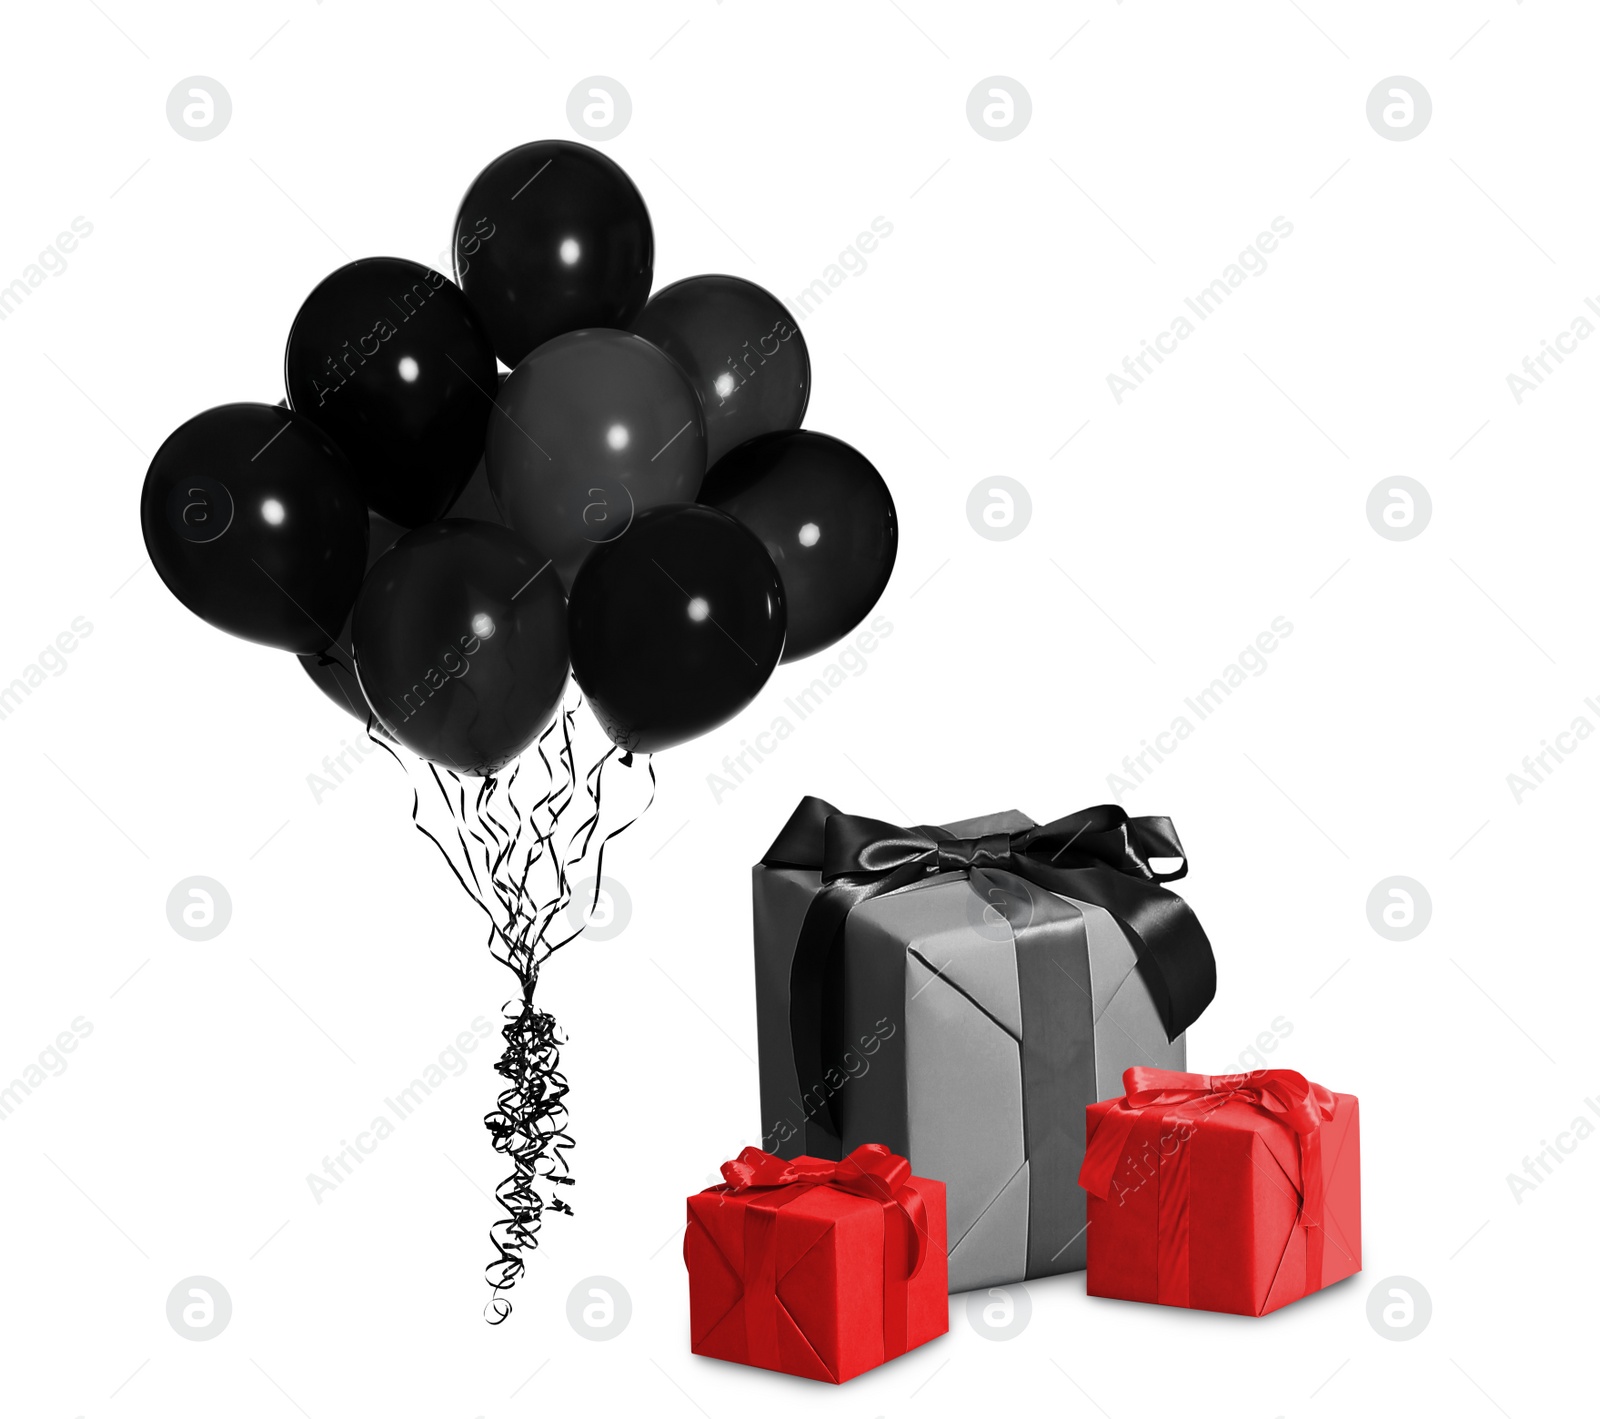 Image of Black Friday concept. Bunch of balloons and boxes on white background